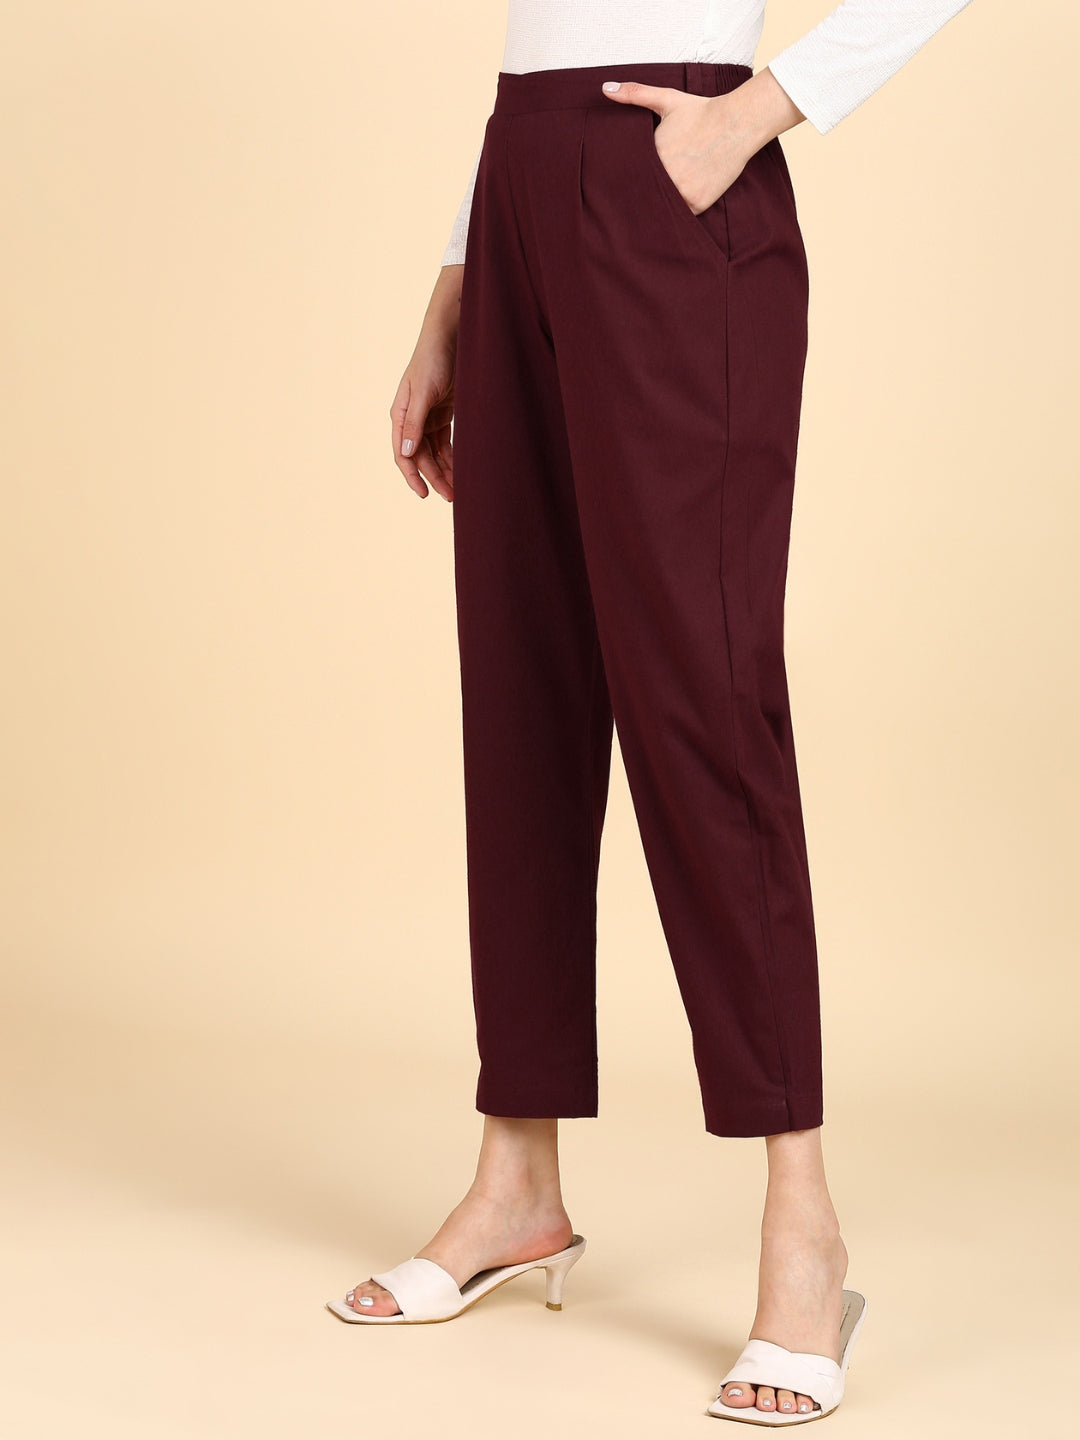 Soft Cotton Solid Color Pant - Maroon